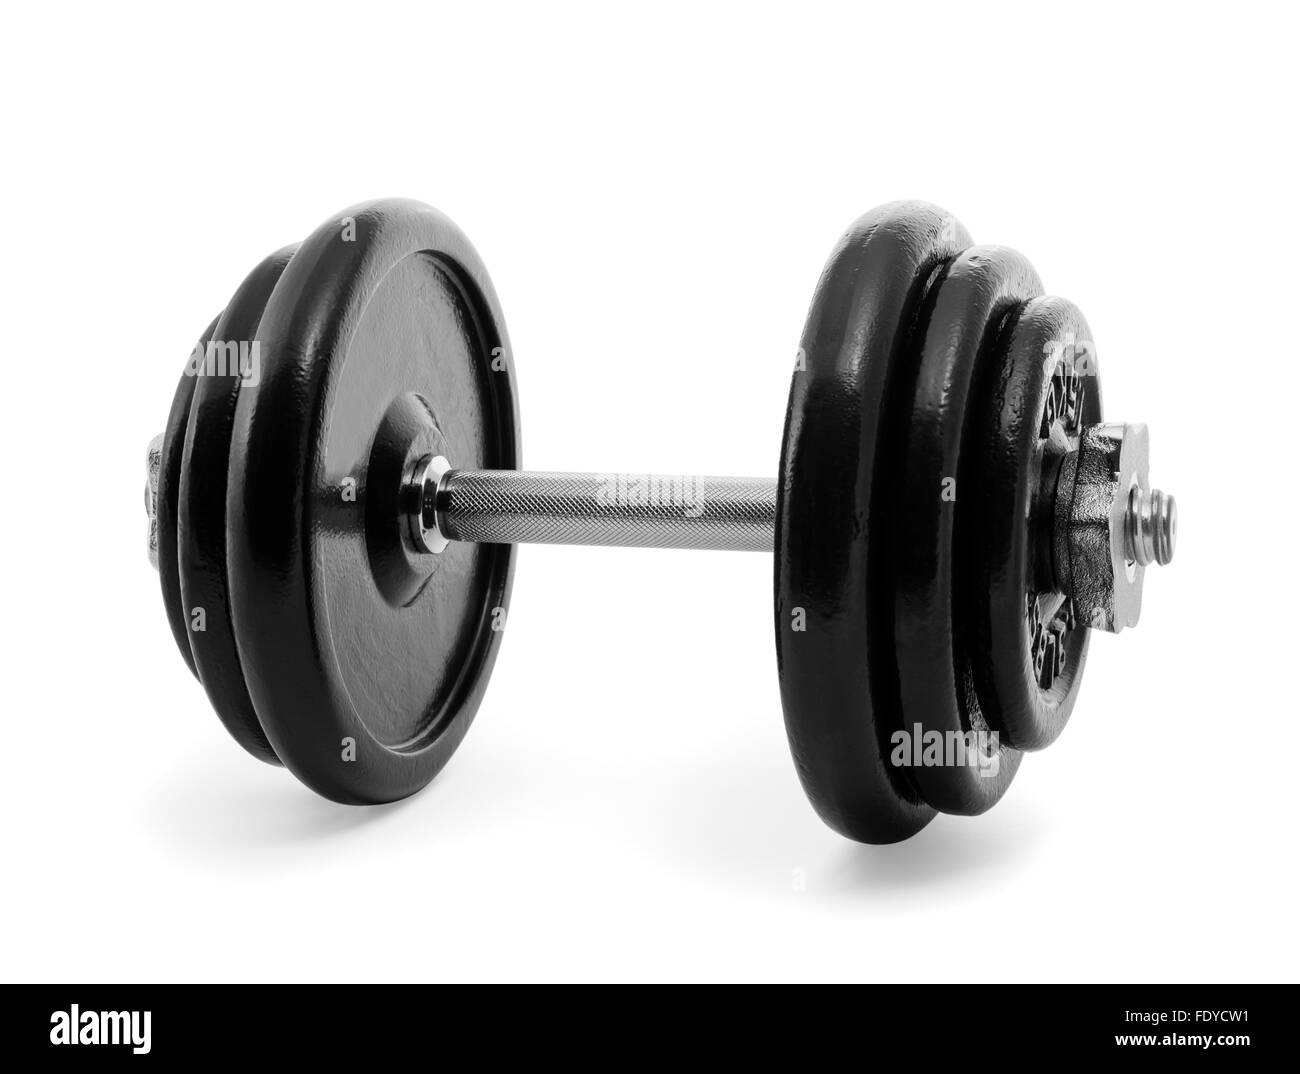 Gym weights Stock Photo